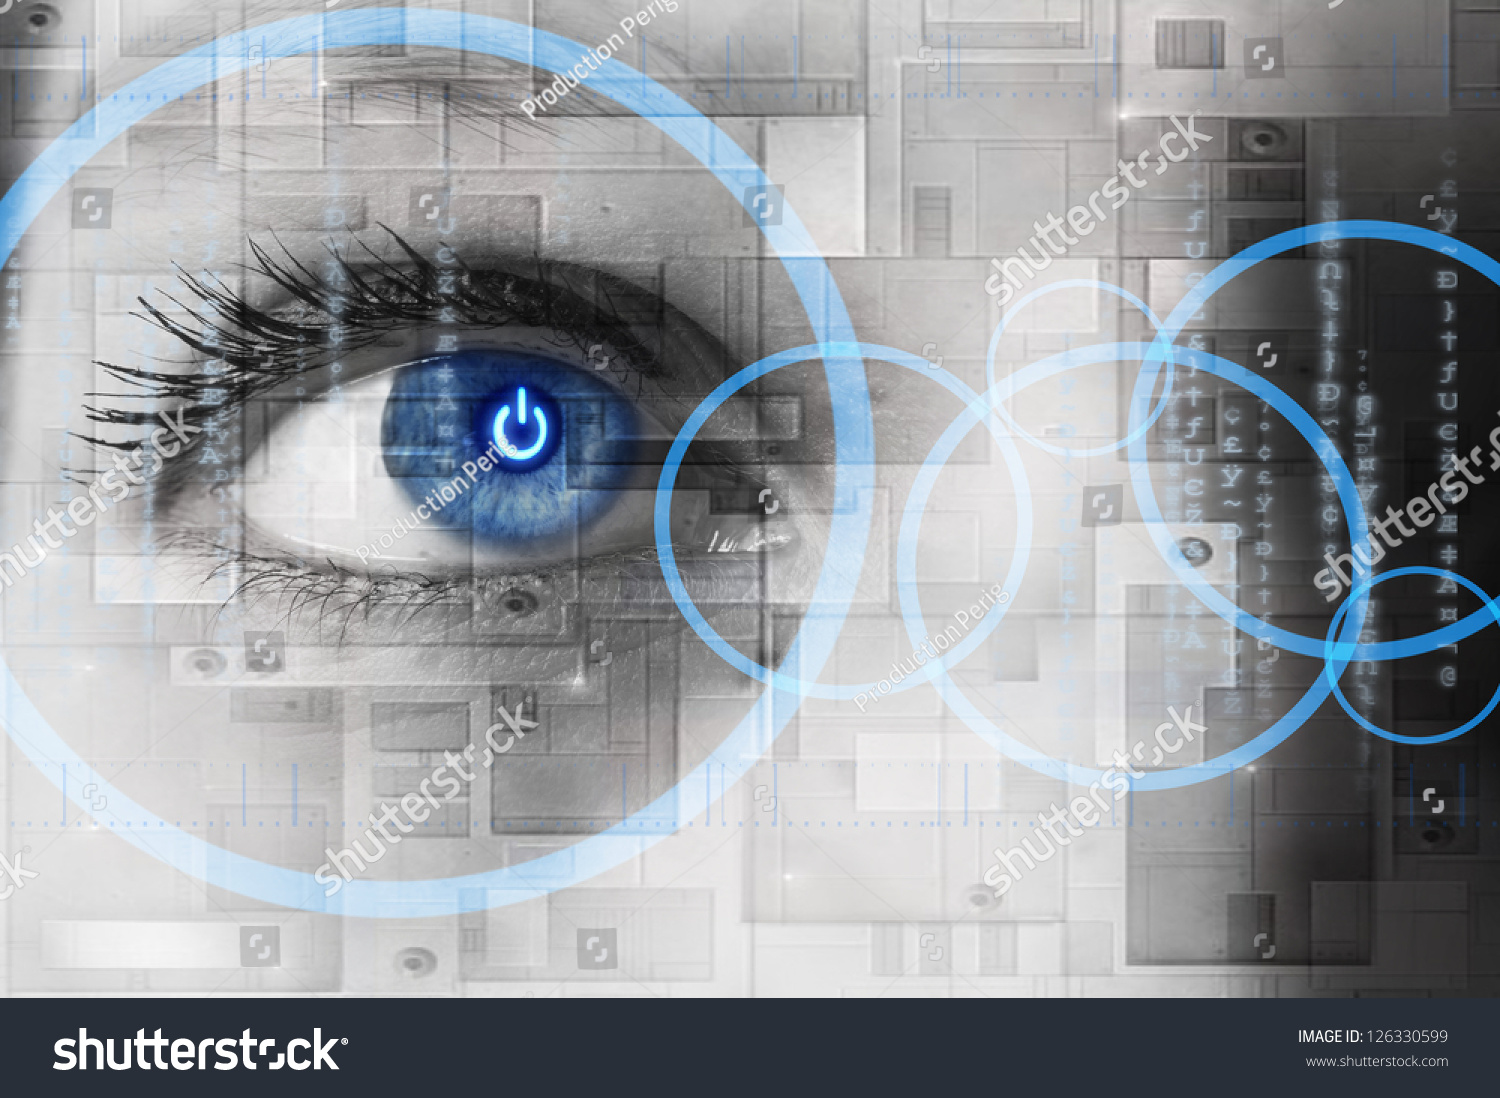 Human eye with power button reflection inside - technology concept #126330599